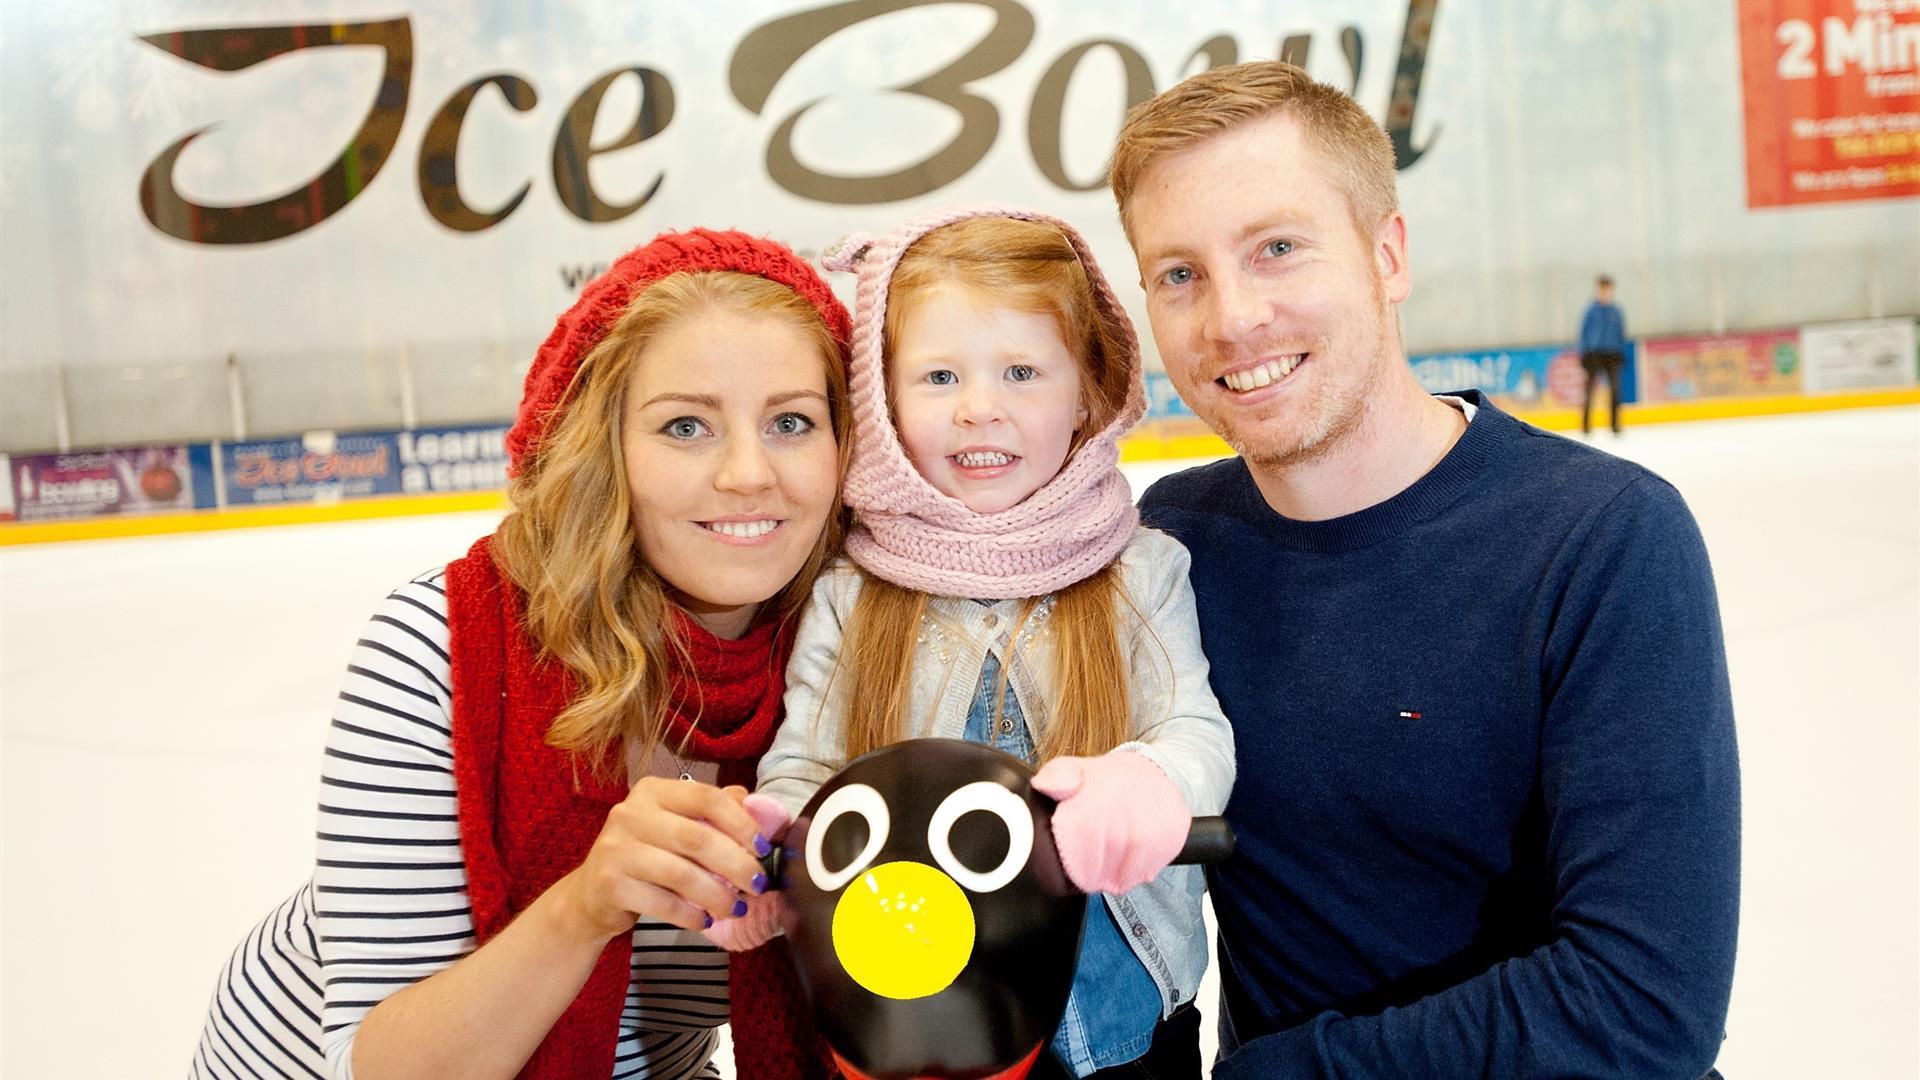 Image is of a couple and small child on the ice rink